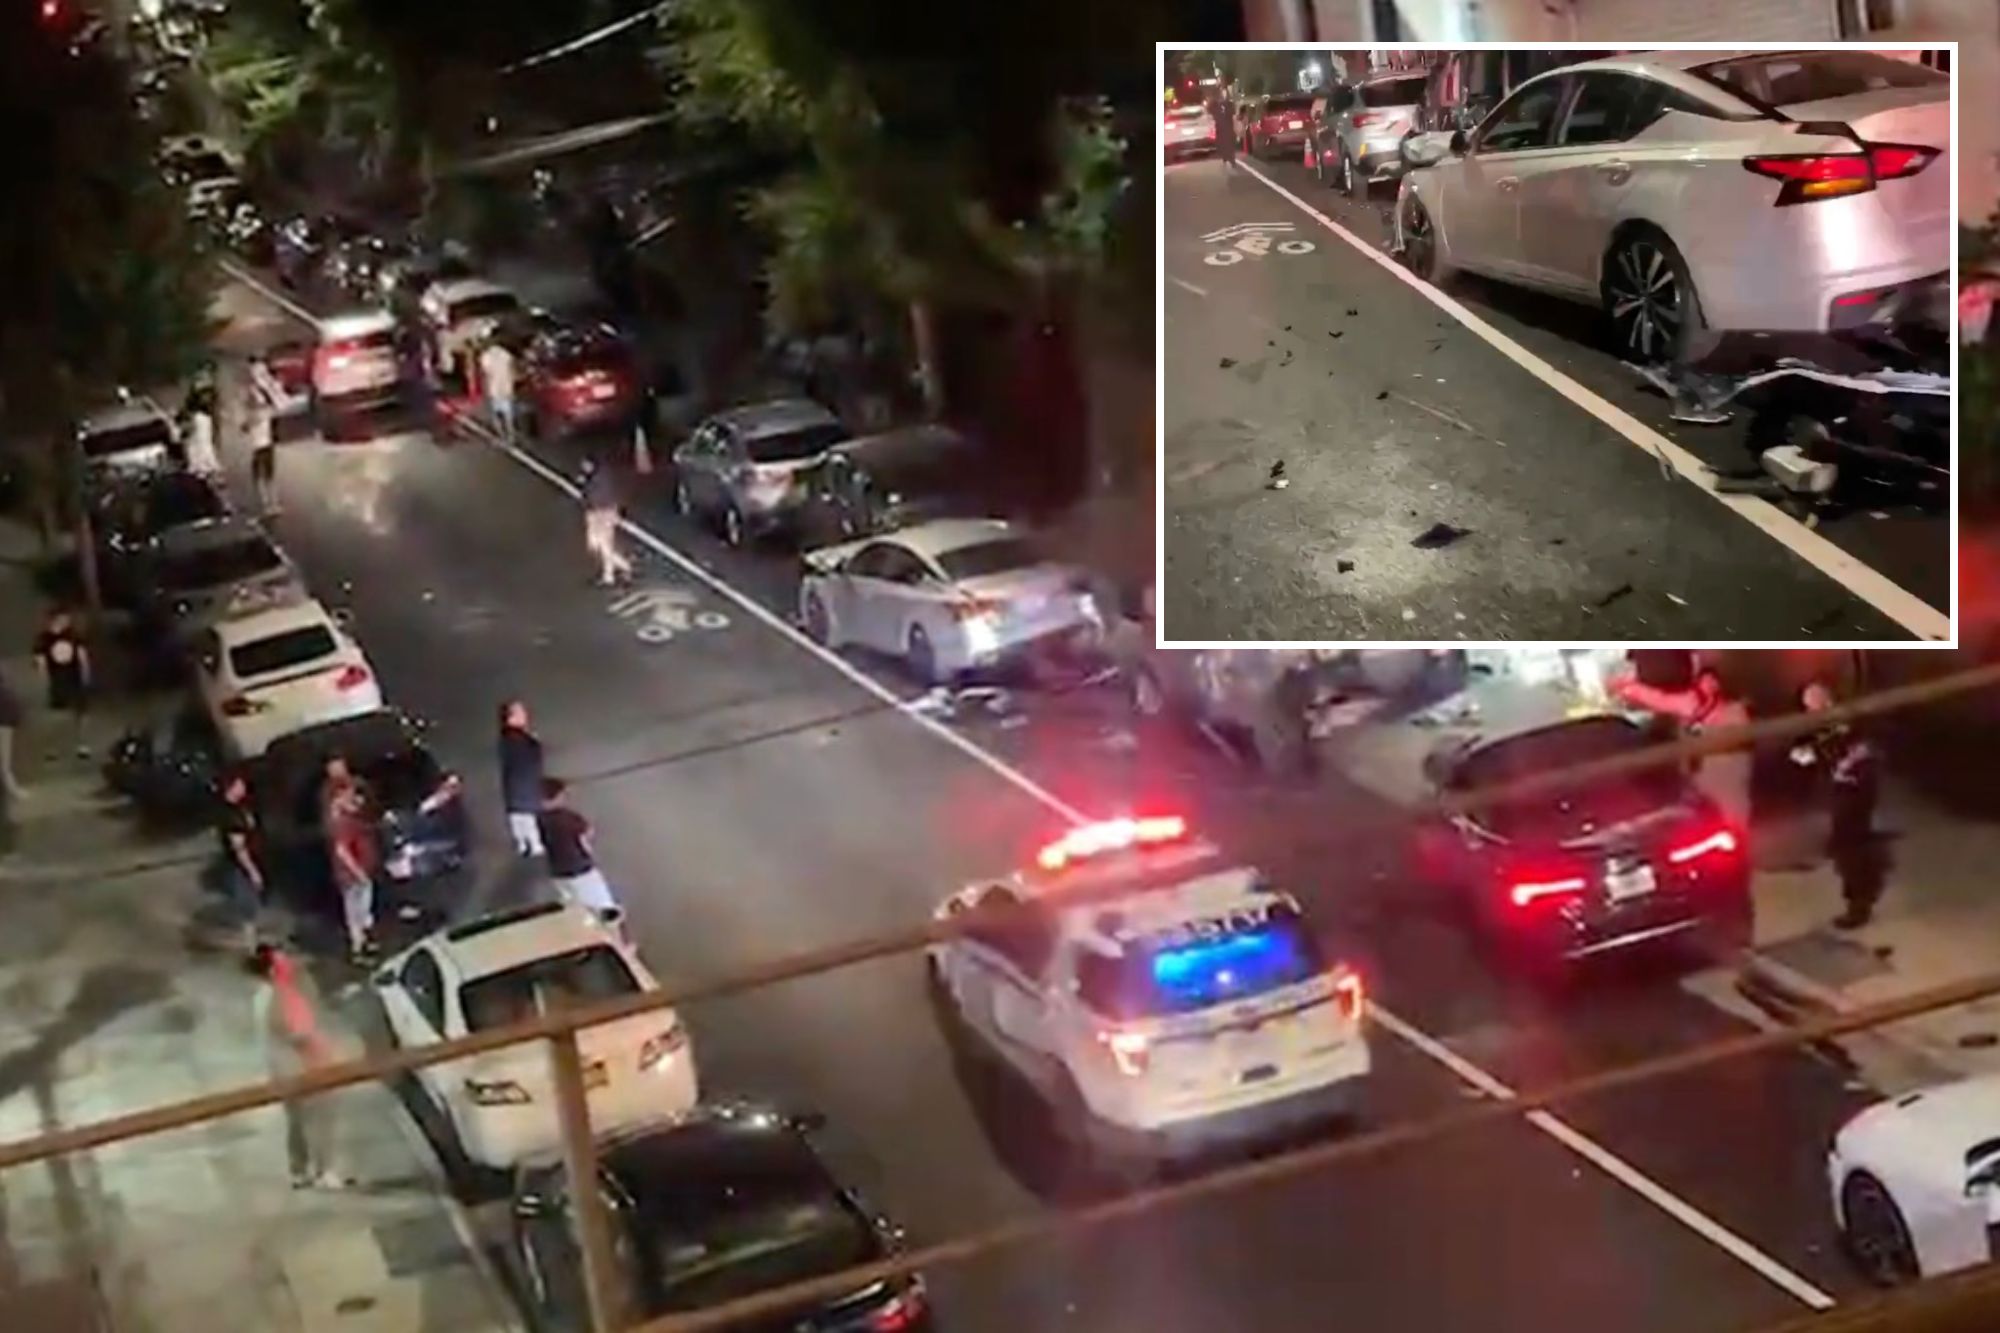 Maniac Lamborghini driver leaves trail of destruction, rams into 9 parked cars on NYC street: cops